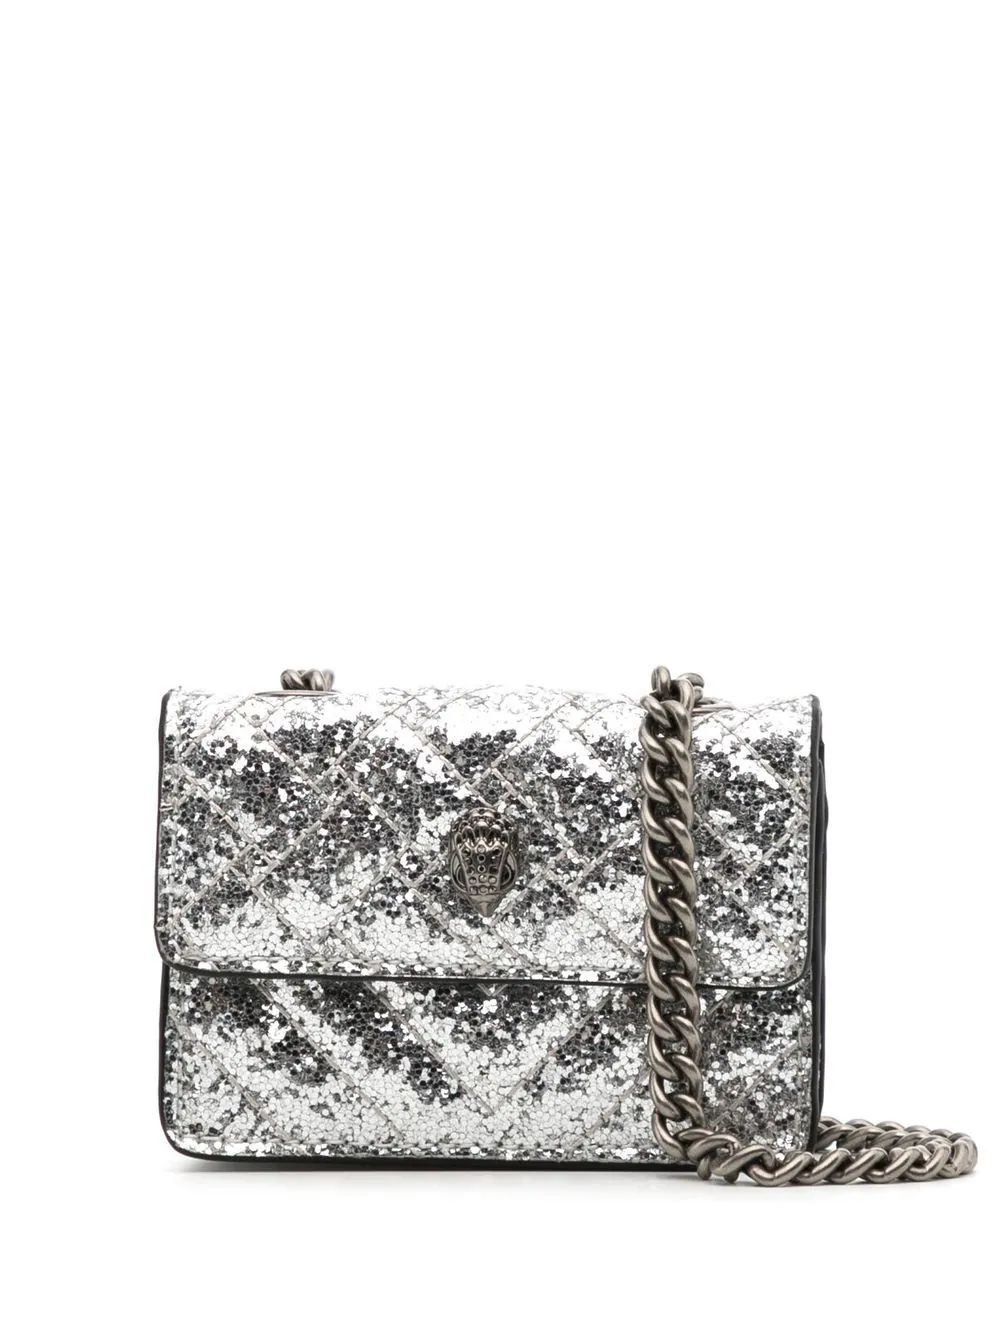 The DetailsKurt Geiger LondonMicro Kensington bagsilver-tone leather quilted glitter detailing si... | Farfetch Global